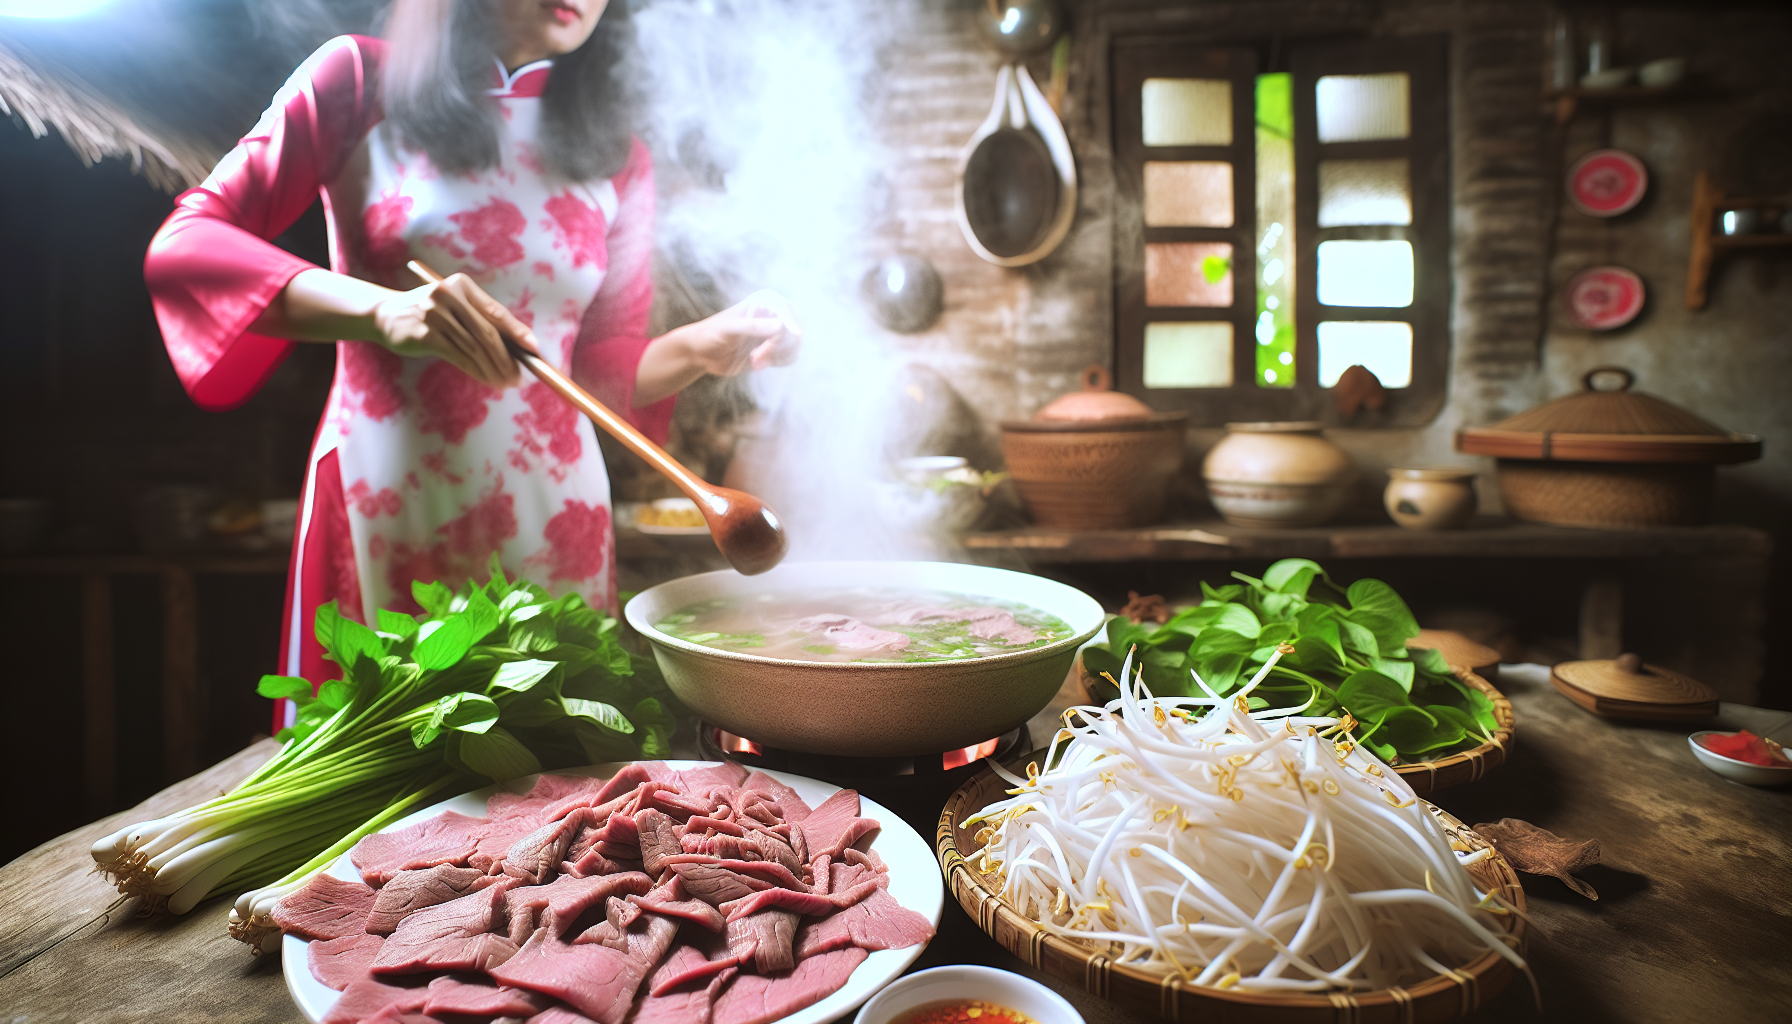 Preparation of traditional beef pho with simmering broth and garnishes